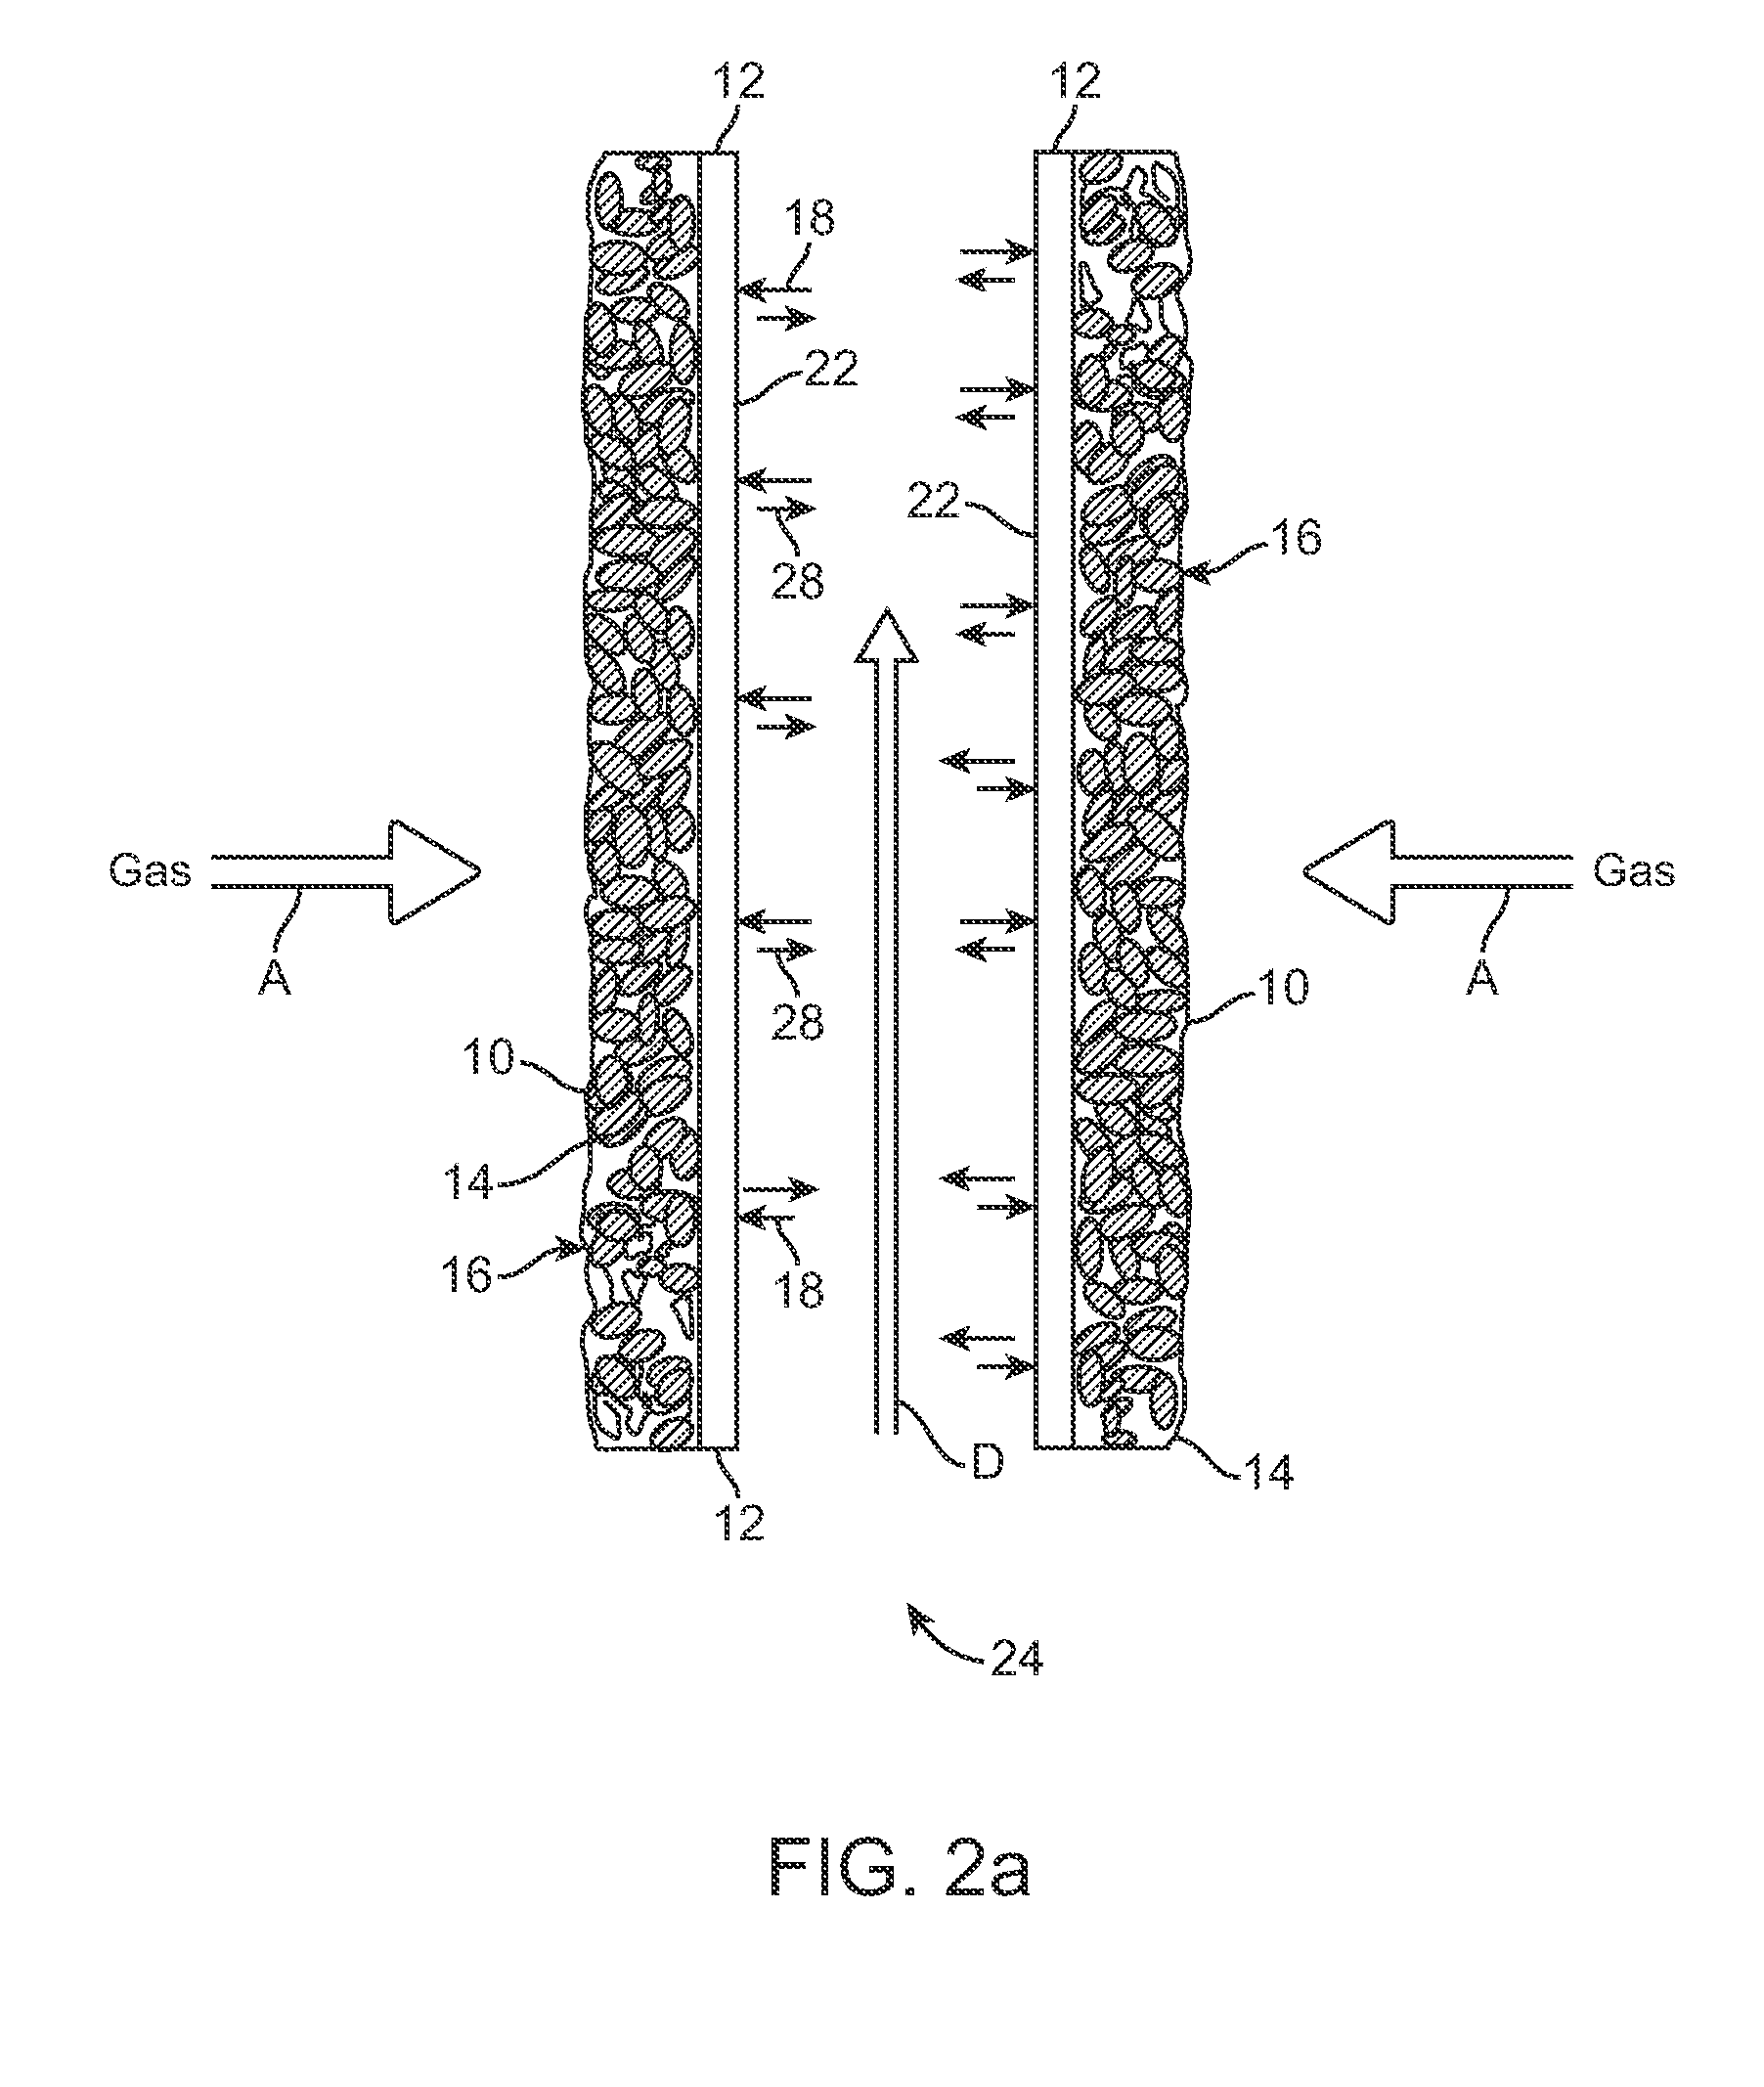 Method of conversion of syngas using microorganism on hydrophilic membrane